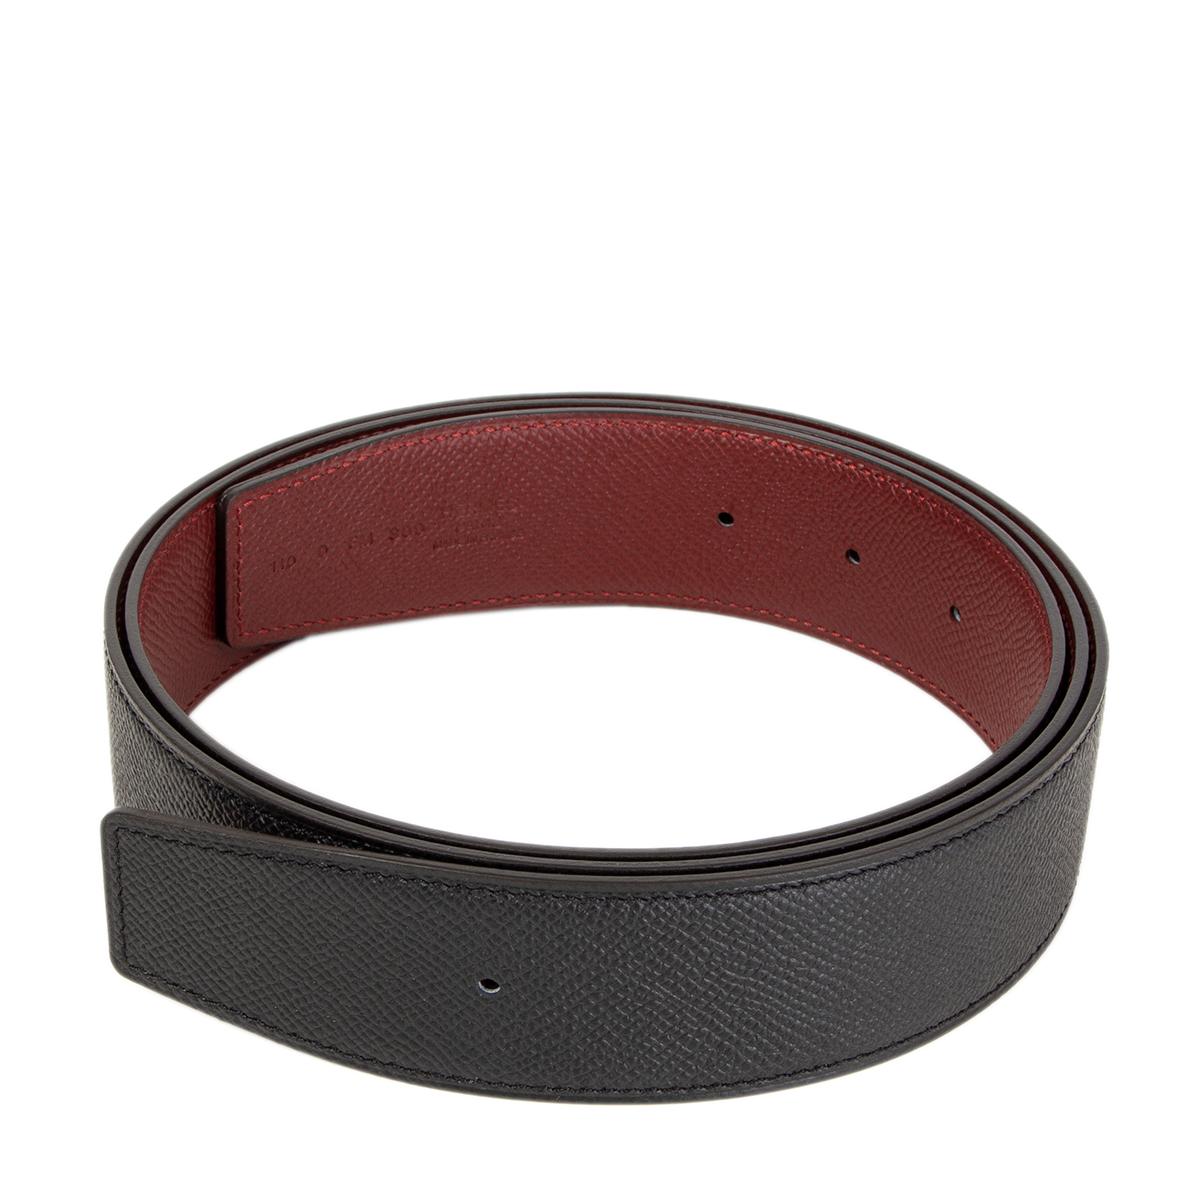 100% authentic Hermes 38mm reversible belt strap in Noir (black) and Rouge H (burgundy) Veau Epsom leather. Brand new. Comes with box.

Measurements
Tag Size	110
Width	3.8cm (1.5in)
Fits	107cm (41.7in) to 112cm (43.7in)

All listing are only for the